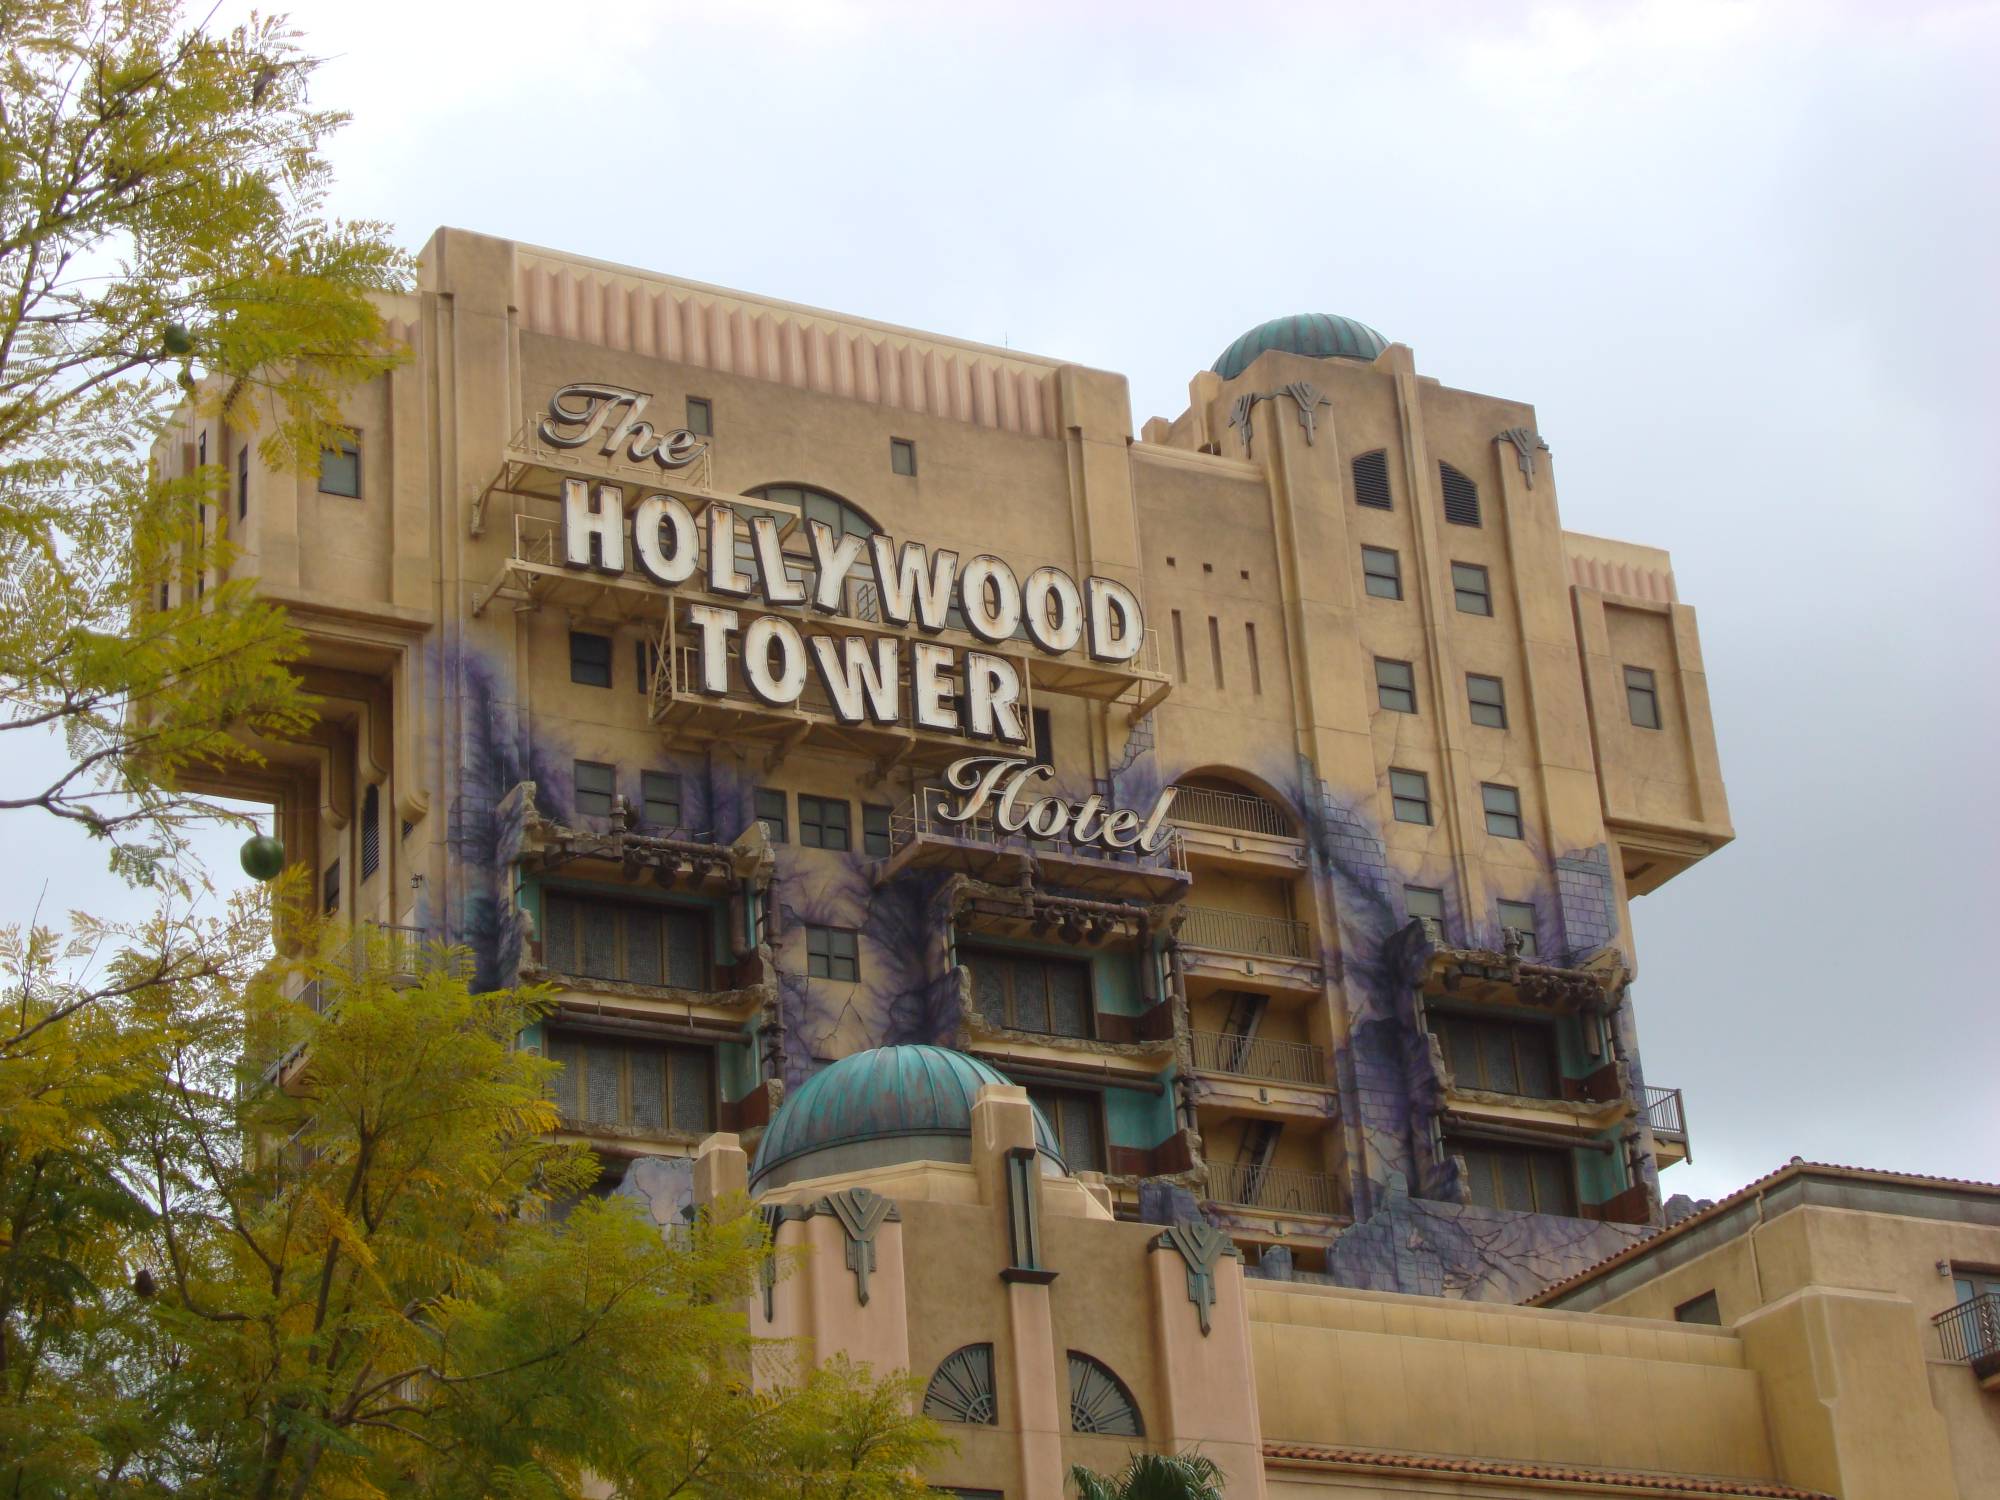 Hollywood Pictures Backlot - The Twilight Zone Tower of Terror